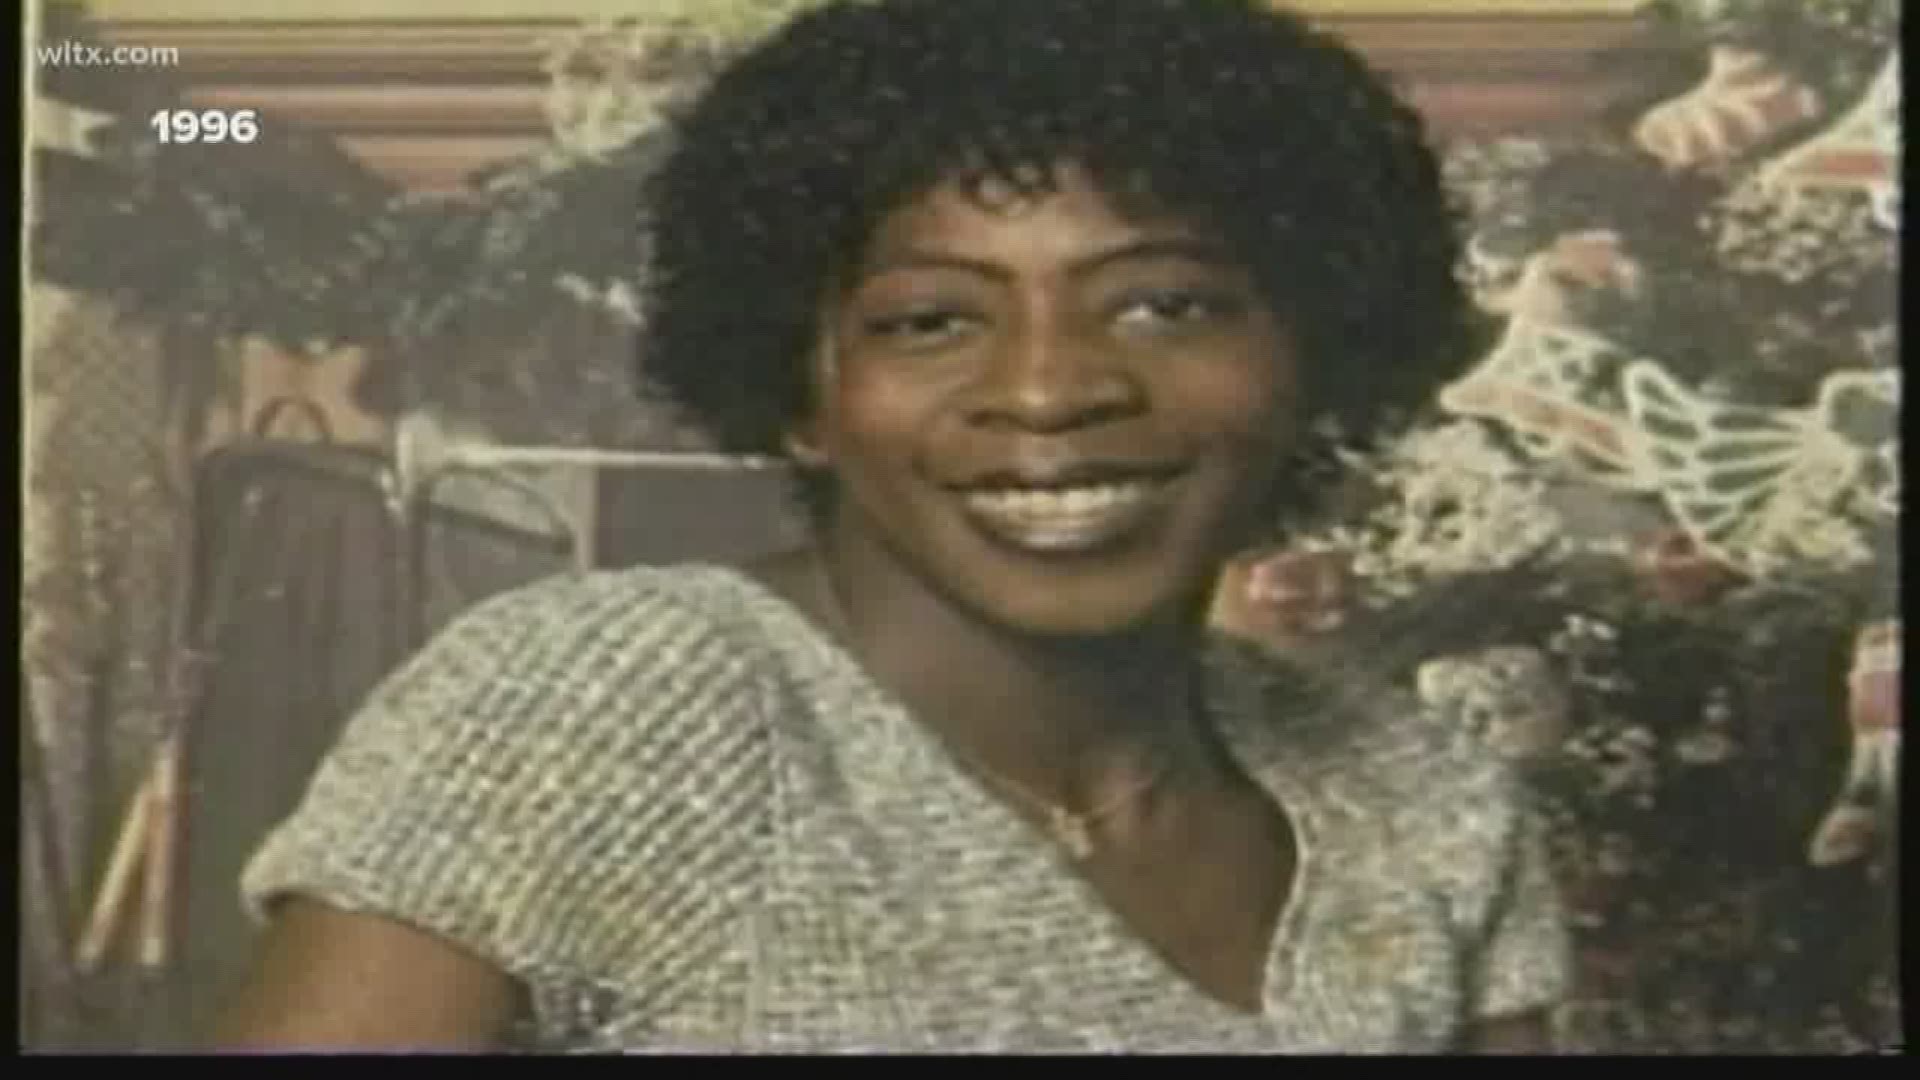 On January 29, 1996 the body of Debra Ann Smith was found at the intersection of Barnard St. and Bozard Mill Rd. in the Batesburg-Leesville area.